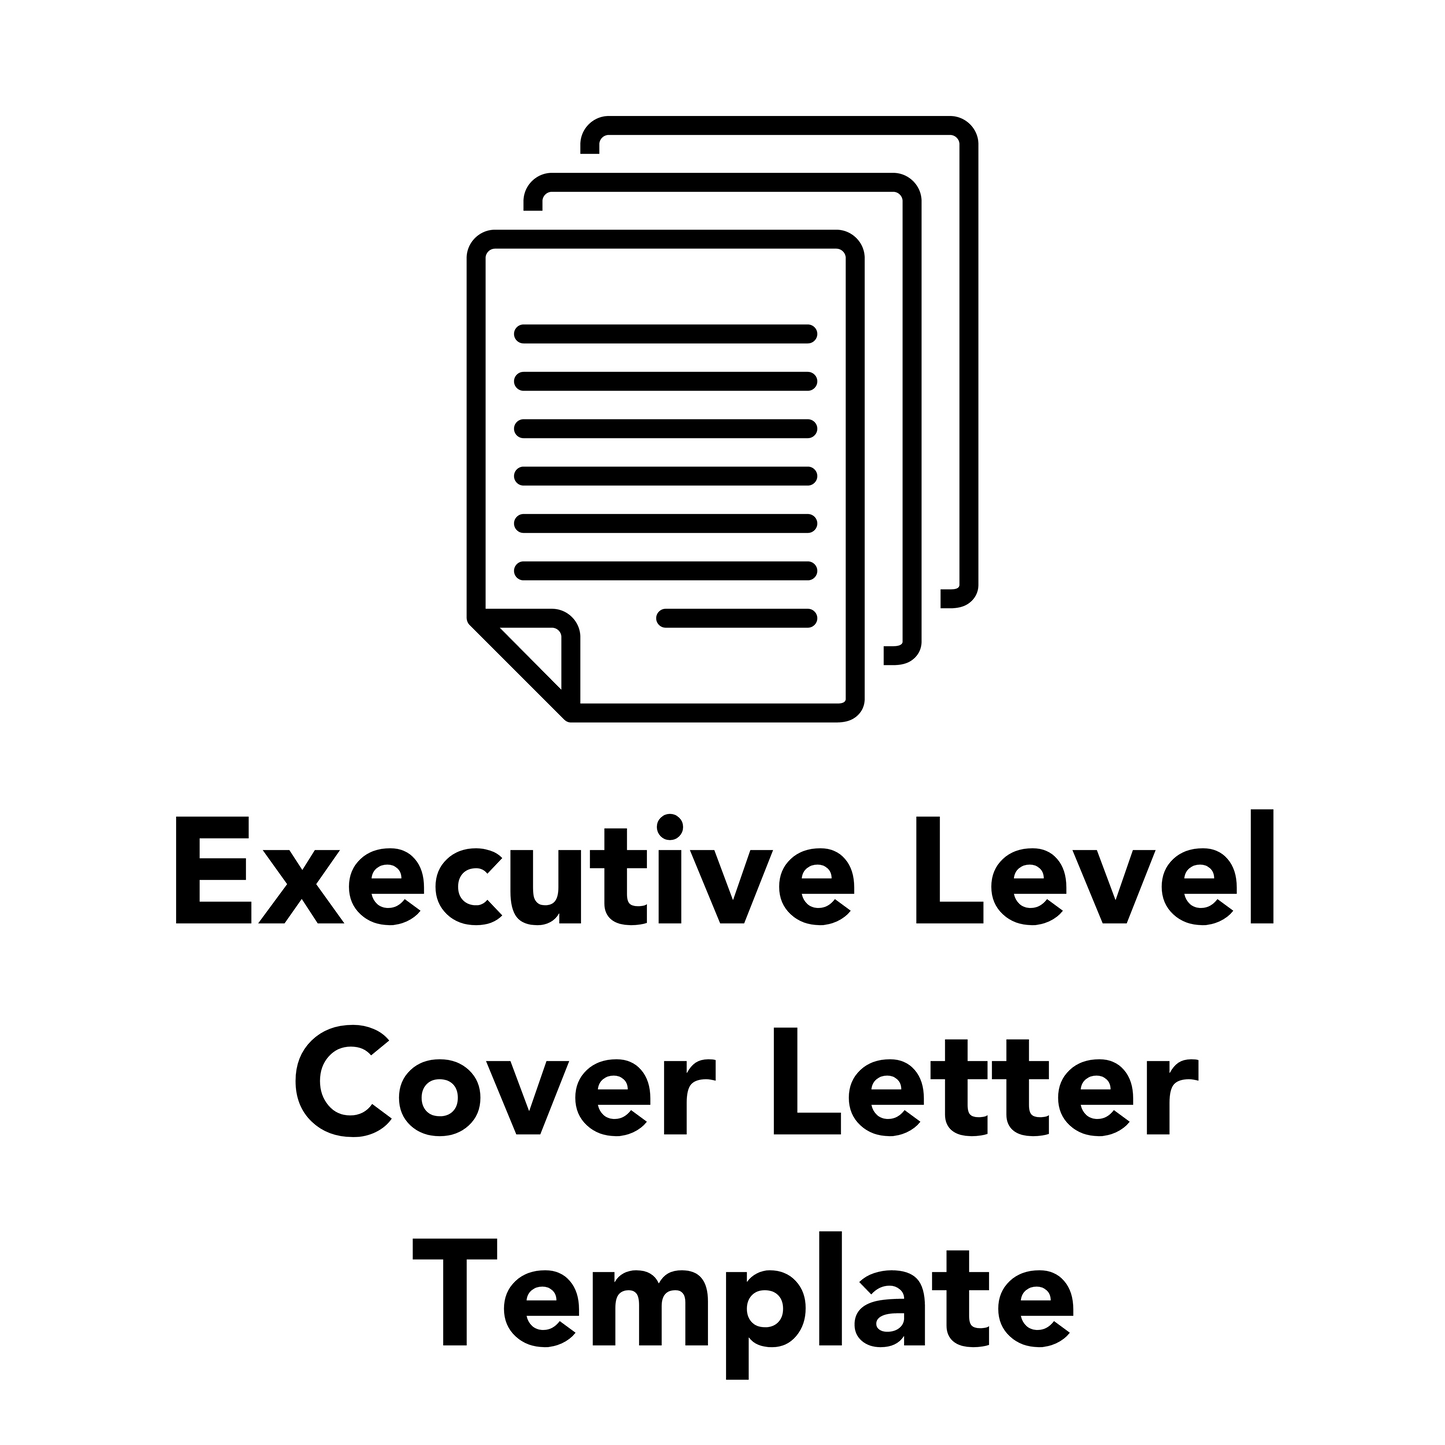 Executive Level Cover Letter Template